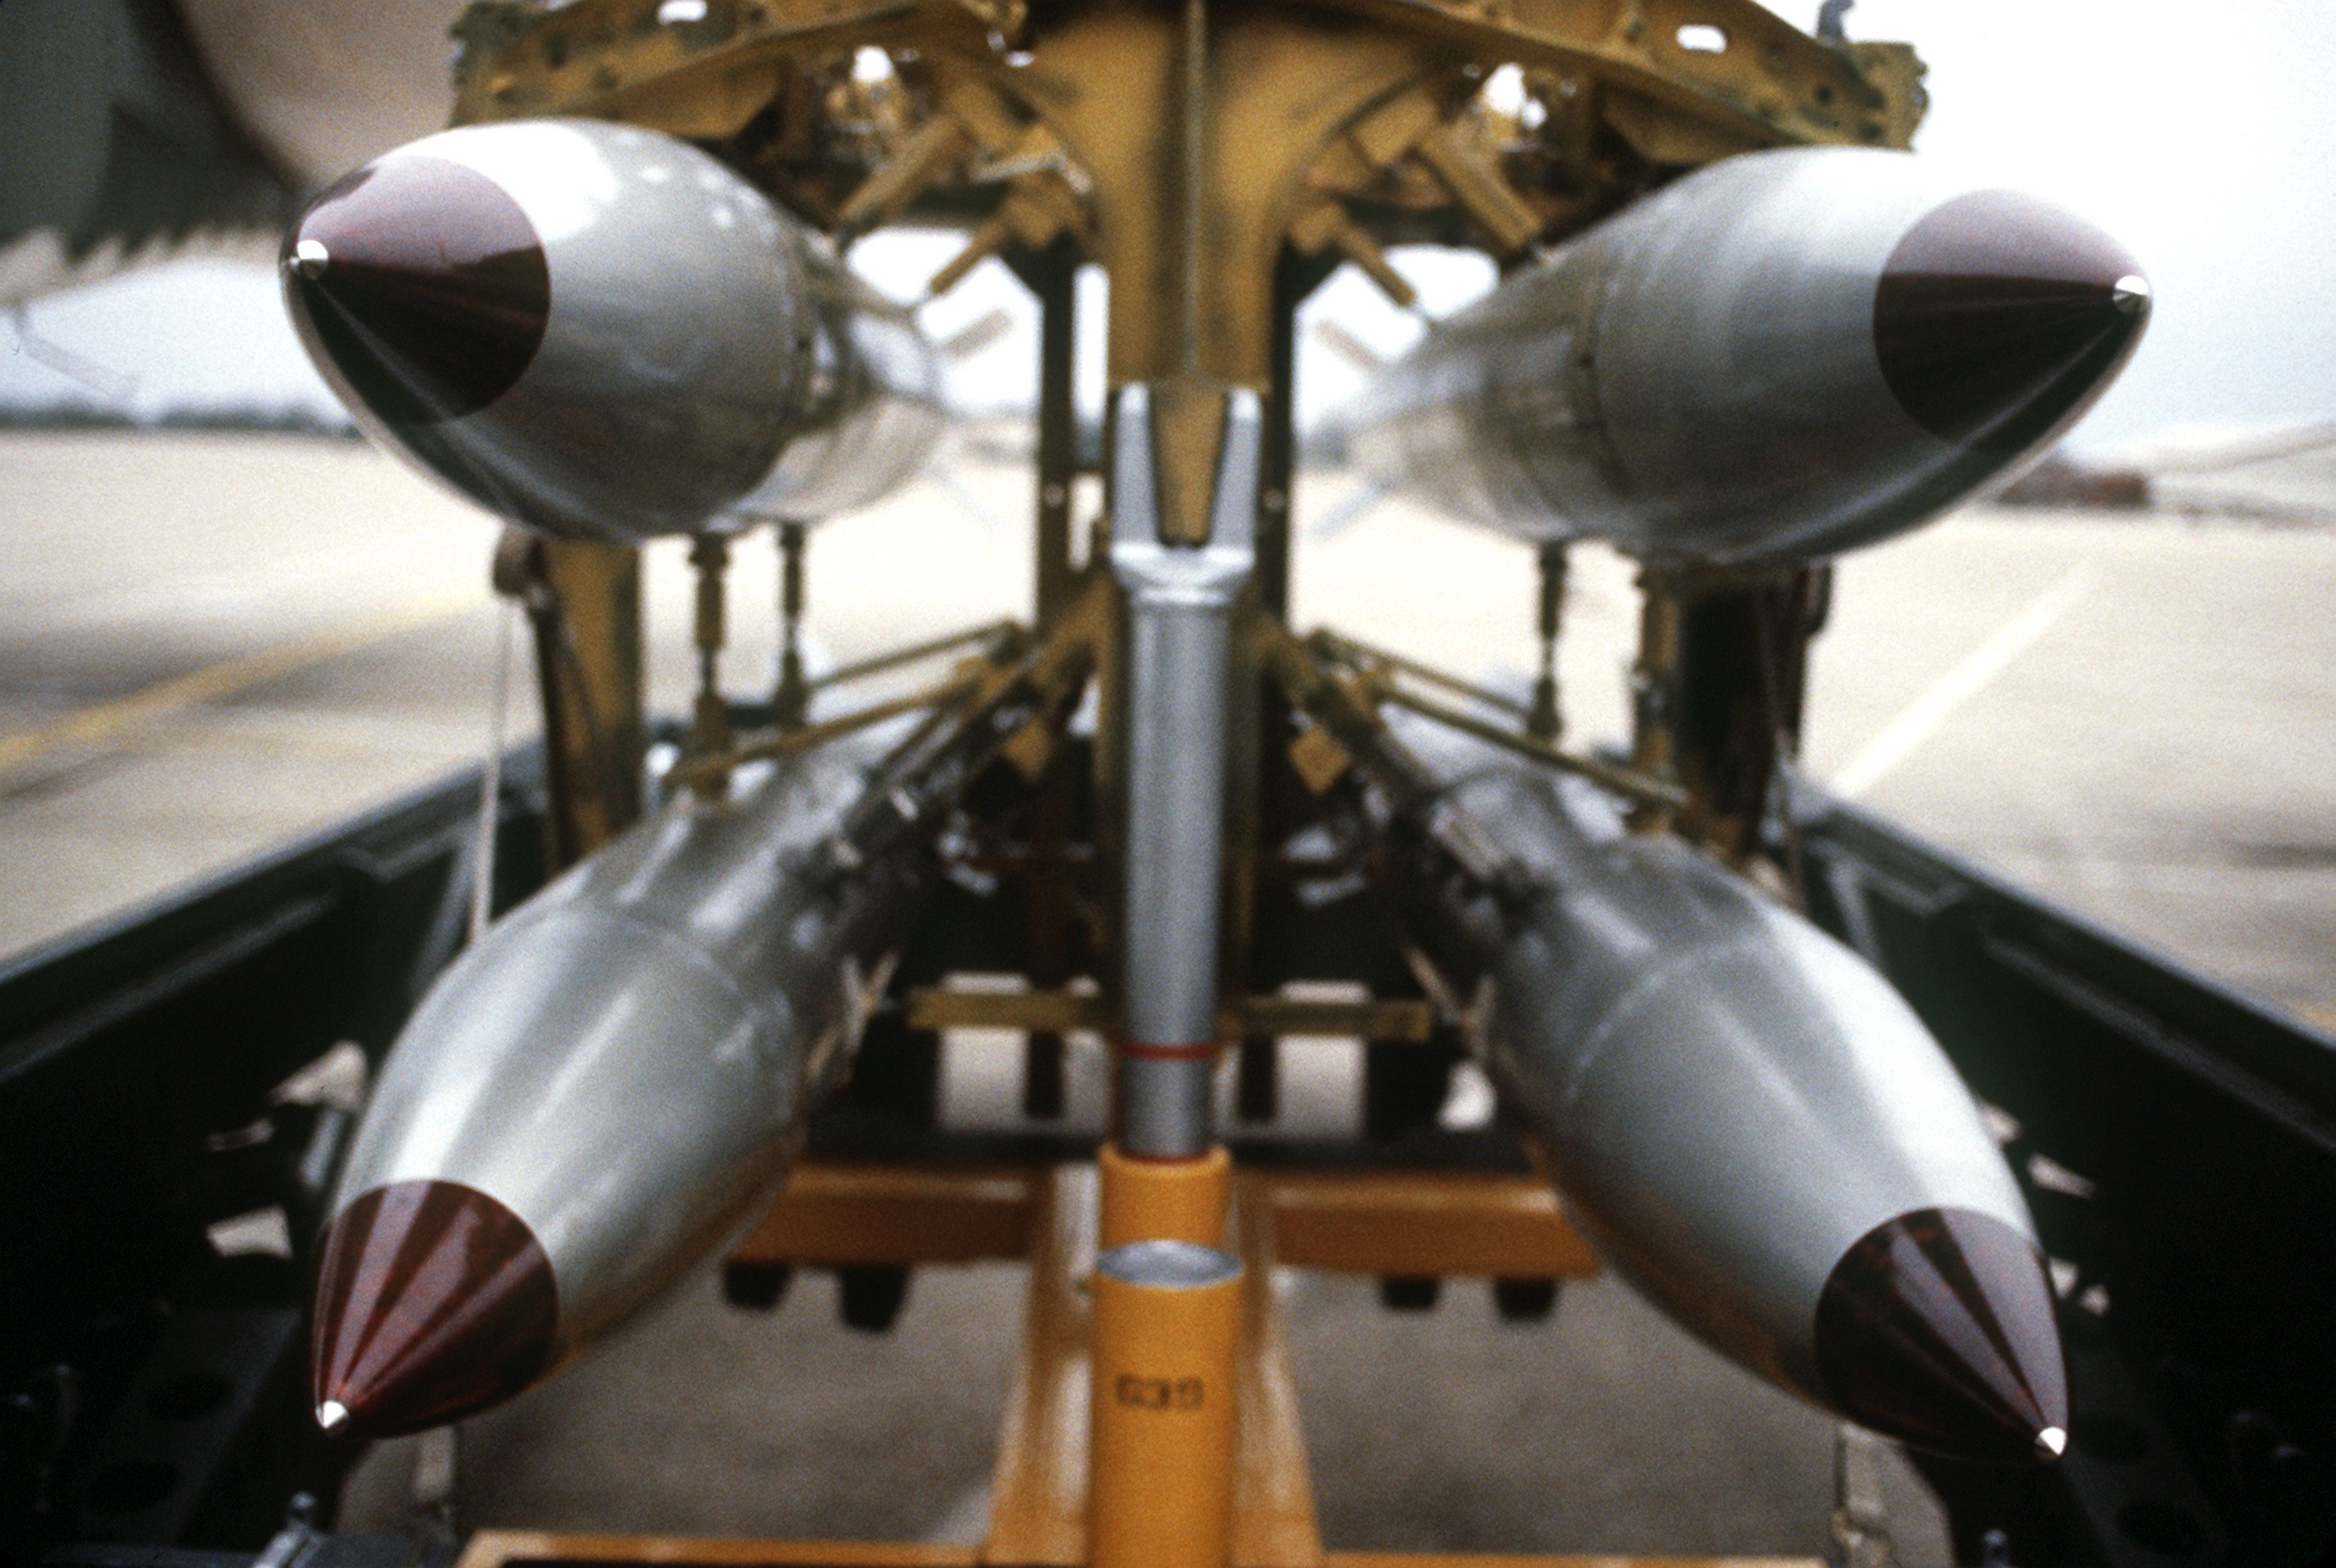 A front view of four nuclear free-fall bombs on a bomb cart.